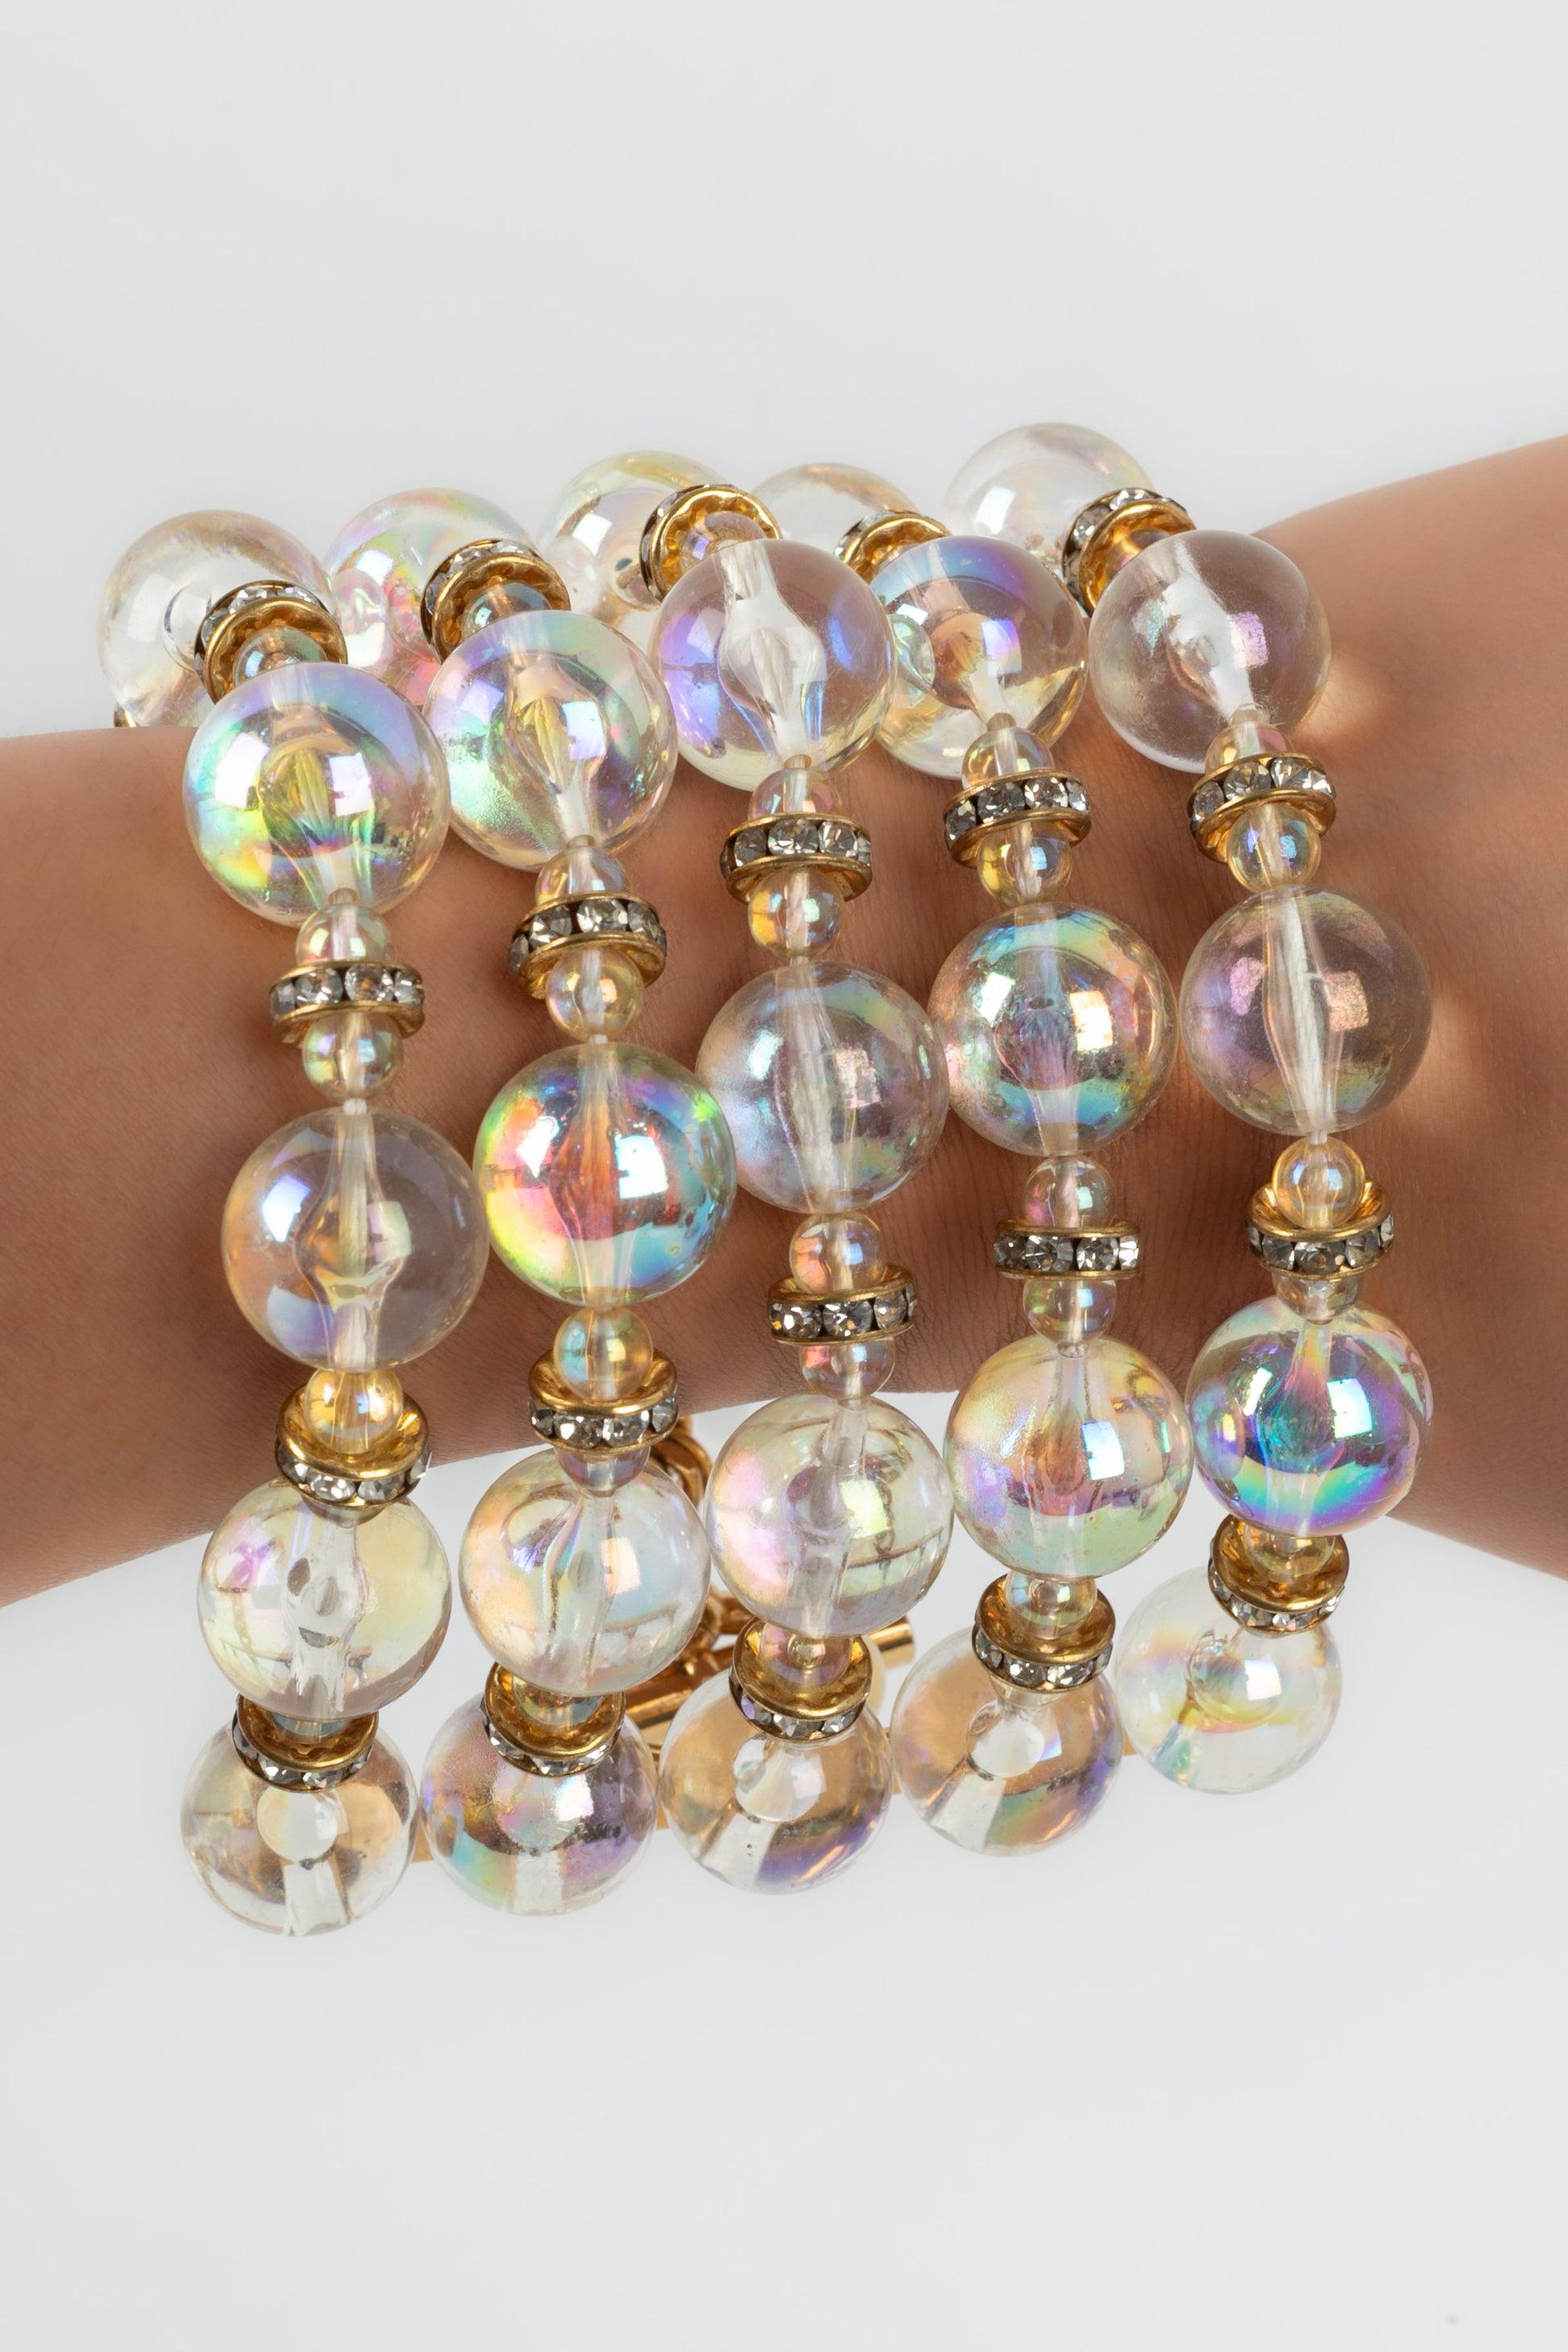 Chanel -(Made in France) Golden metal bracelet with rhinestone circles and transparent pearls. 2cc8 Collection.

Additional information:
Condition: Very good condition
Dimensions: Length: 23 cm

Seller Reference: BRAB54